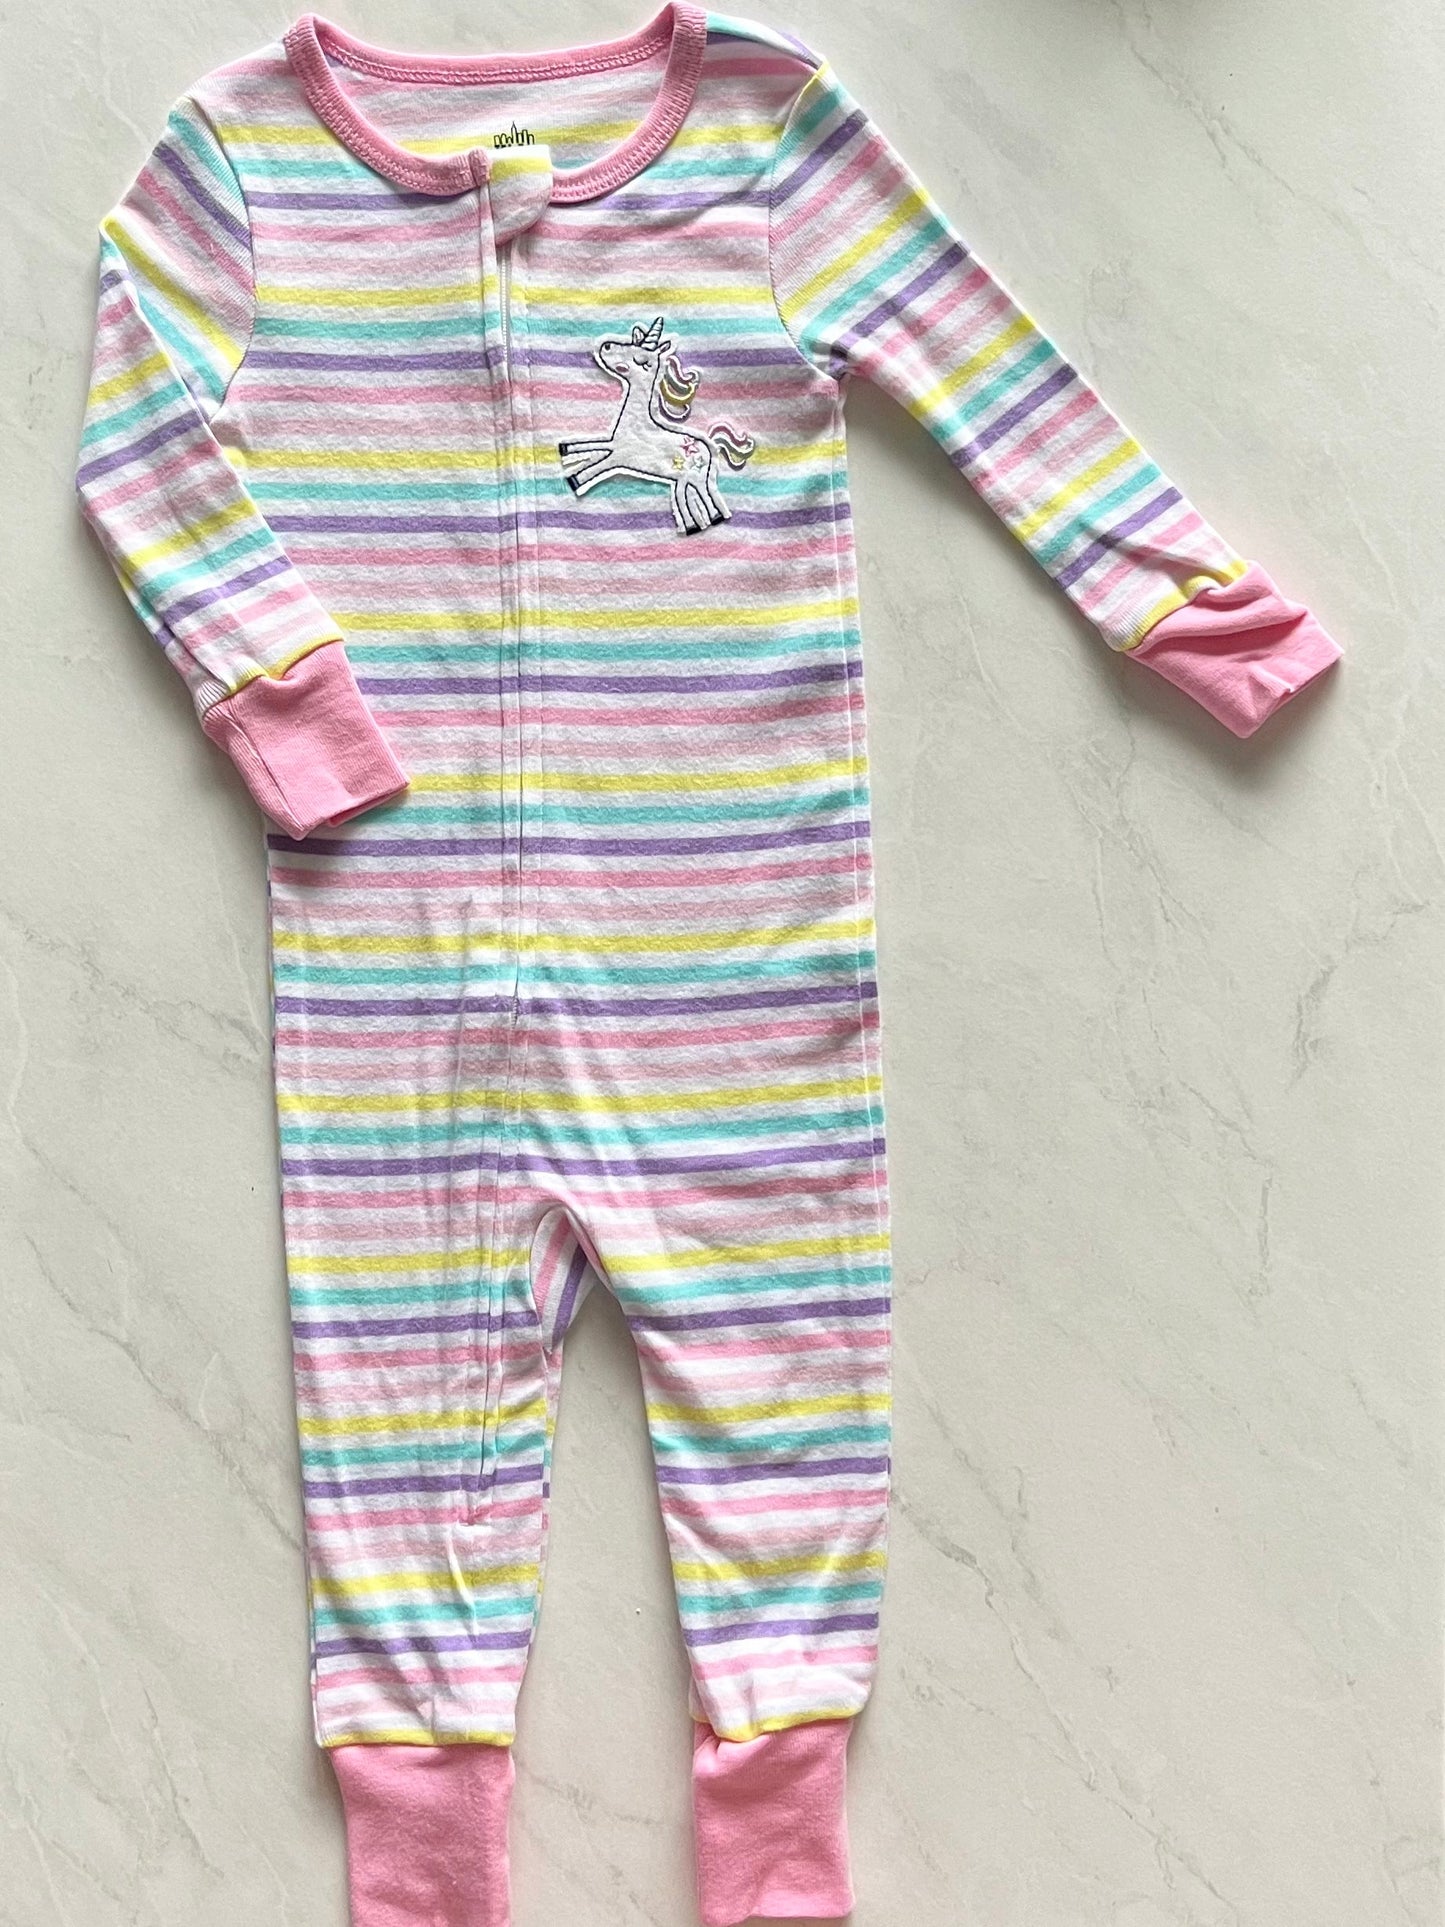 NEW One-piece pajamas - Kids Headquarters - 12 months (small size)